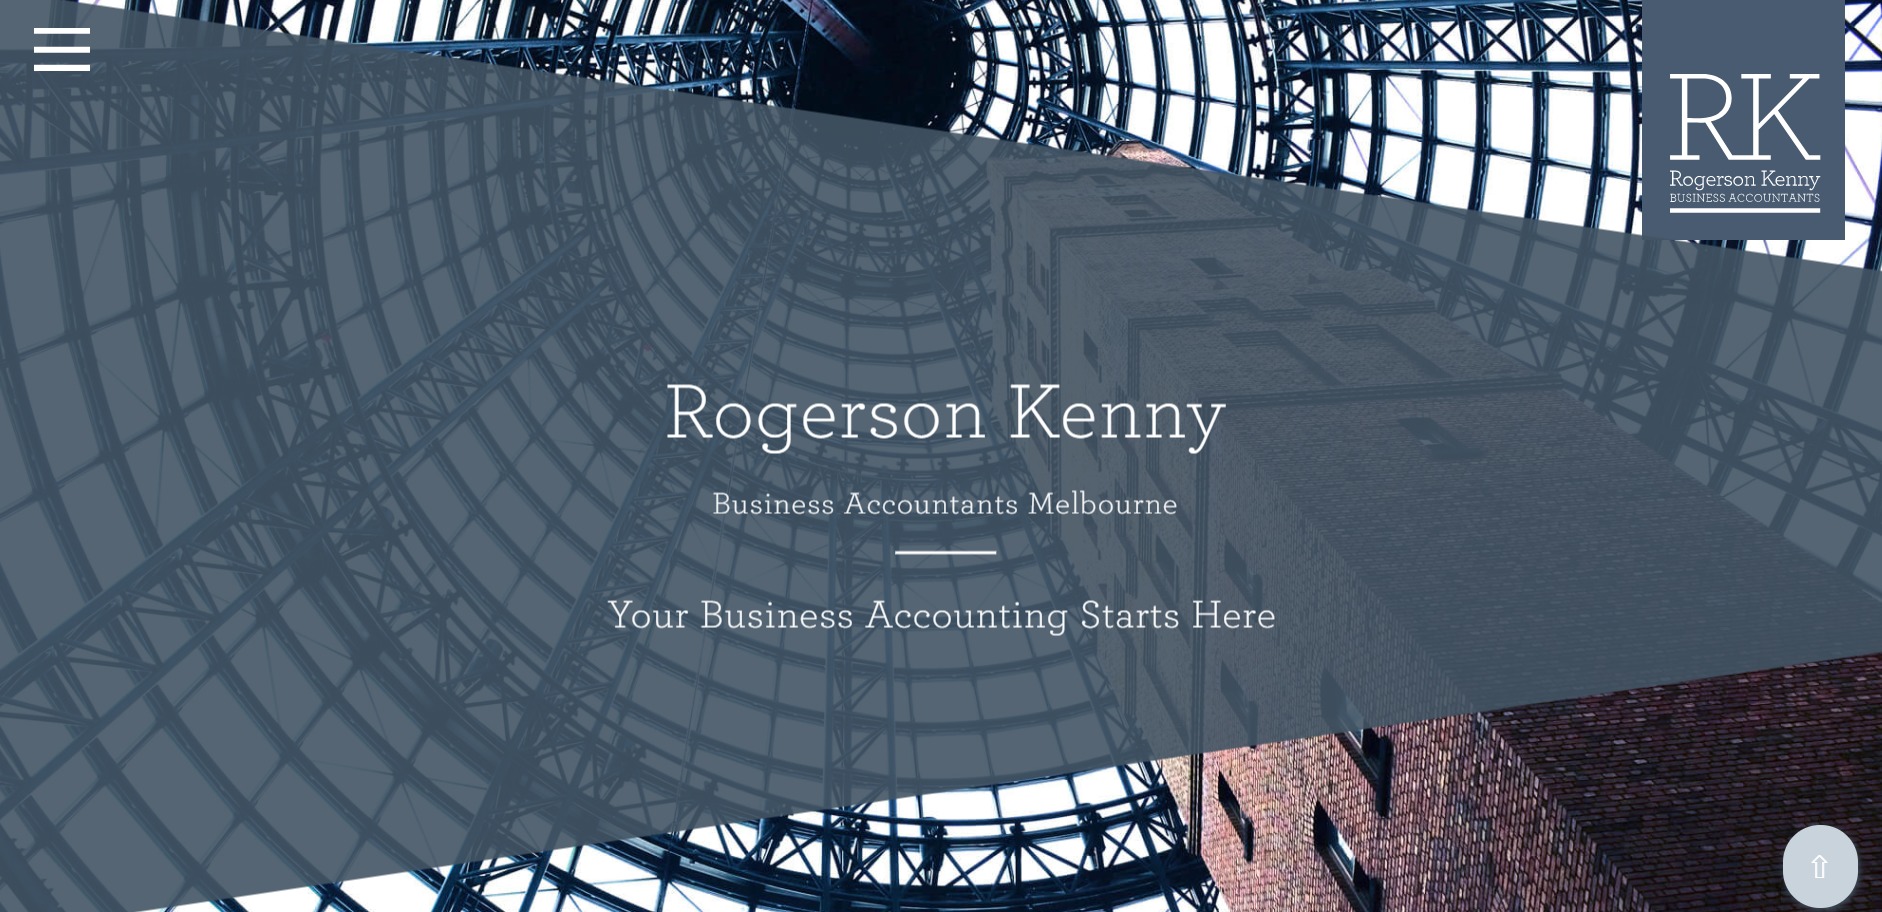 Rogerson Kenny Business Accountants